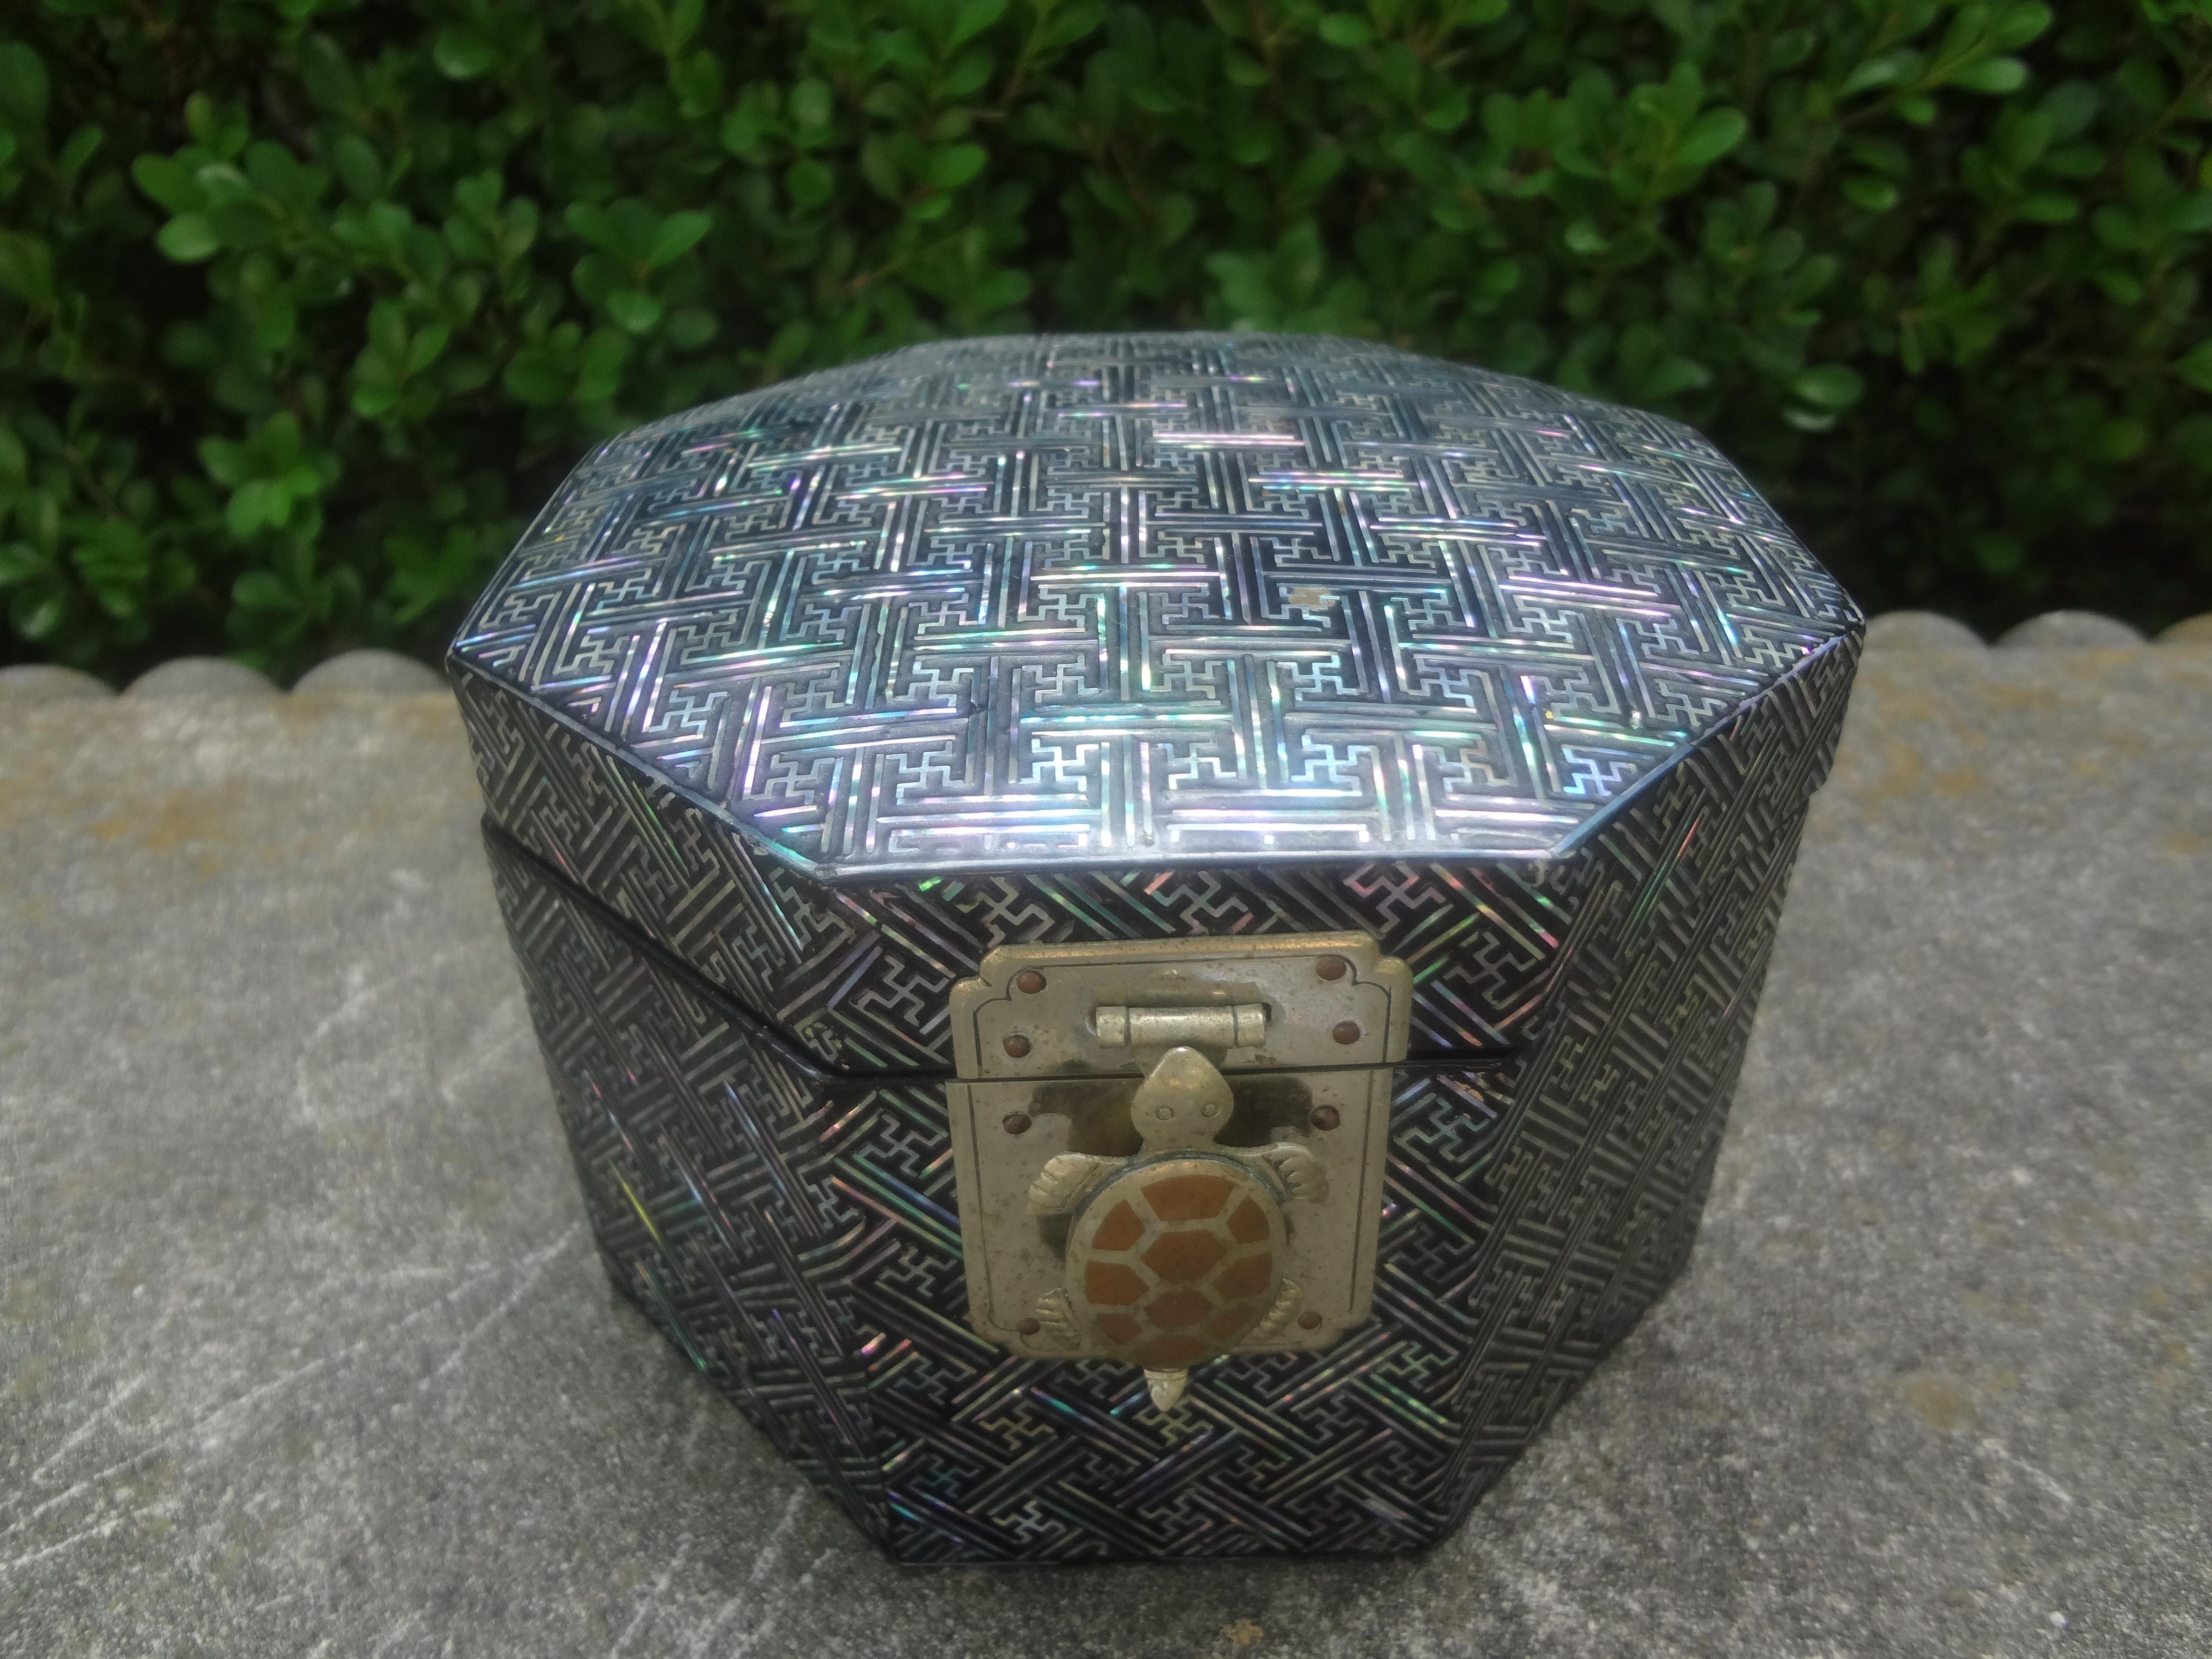 Vintage Asian Octagonal Lacquer Box With Turtle Closure.
Lovely 20th century Asian lacquer box with Greek key design and a metal turtle closure.
This beautiful decorative box is the perfect coffee table or dressing table accessory!